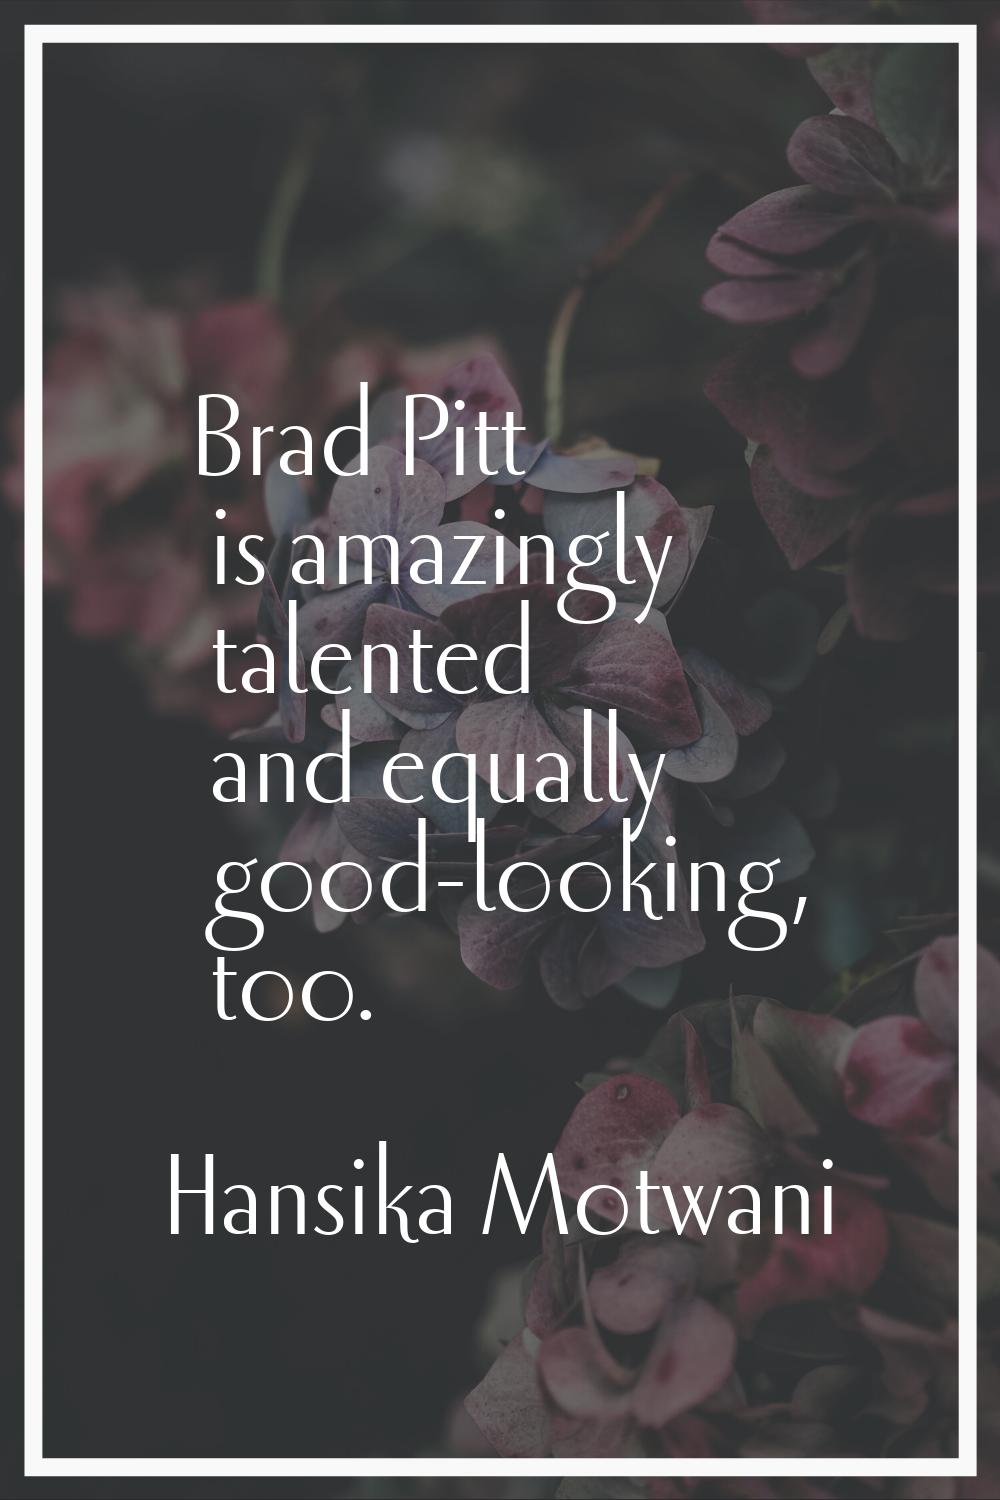 Brad Pitt is amazingly talented and equally good-looking, too.